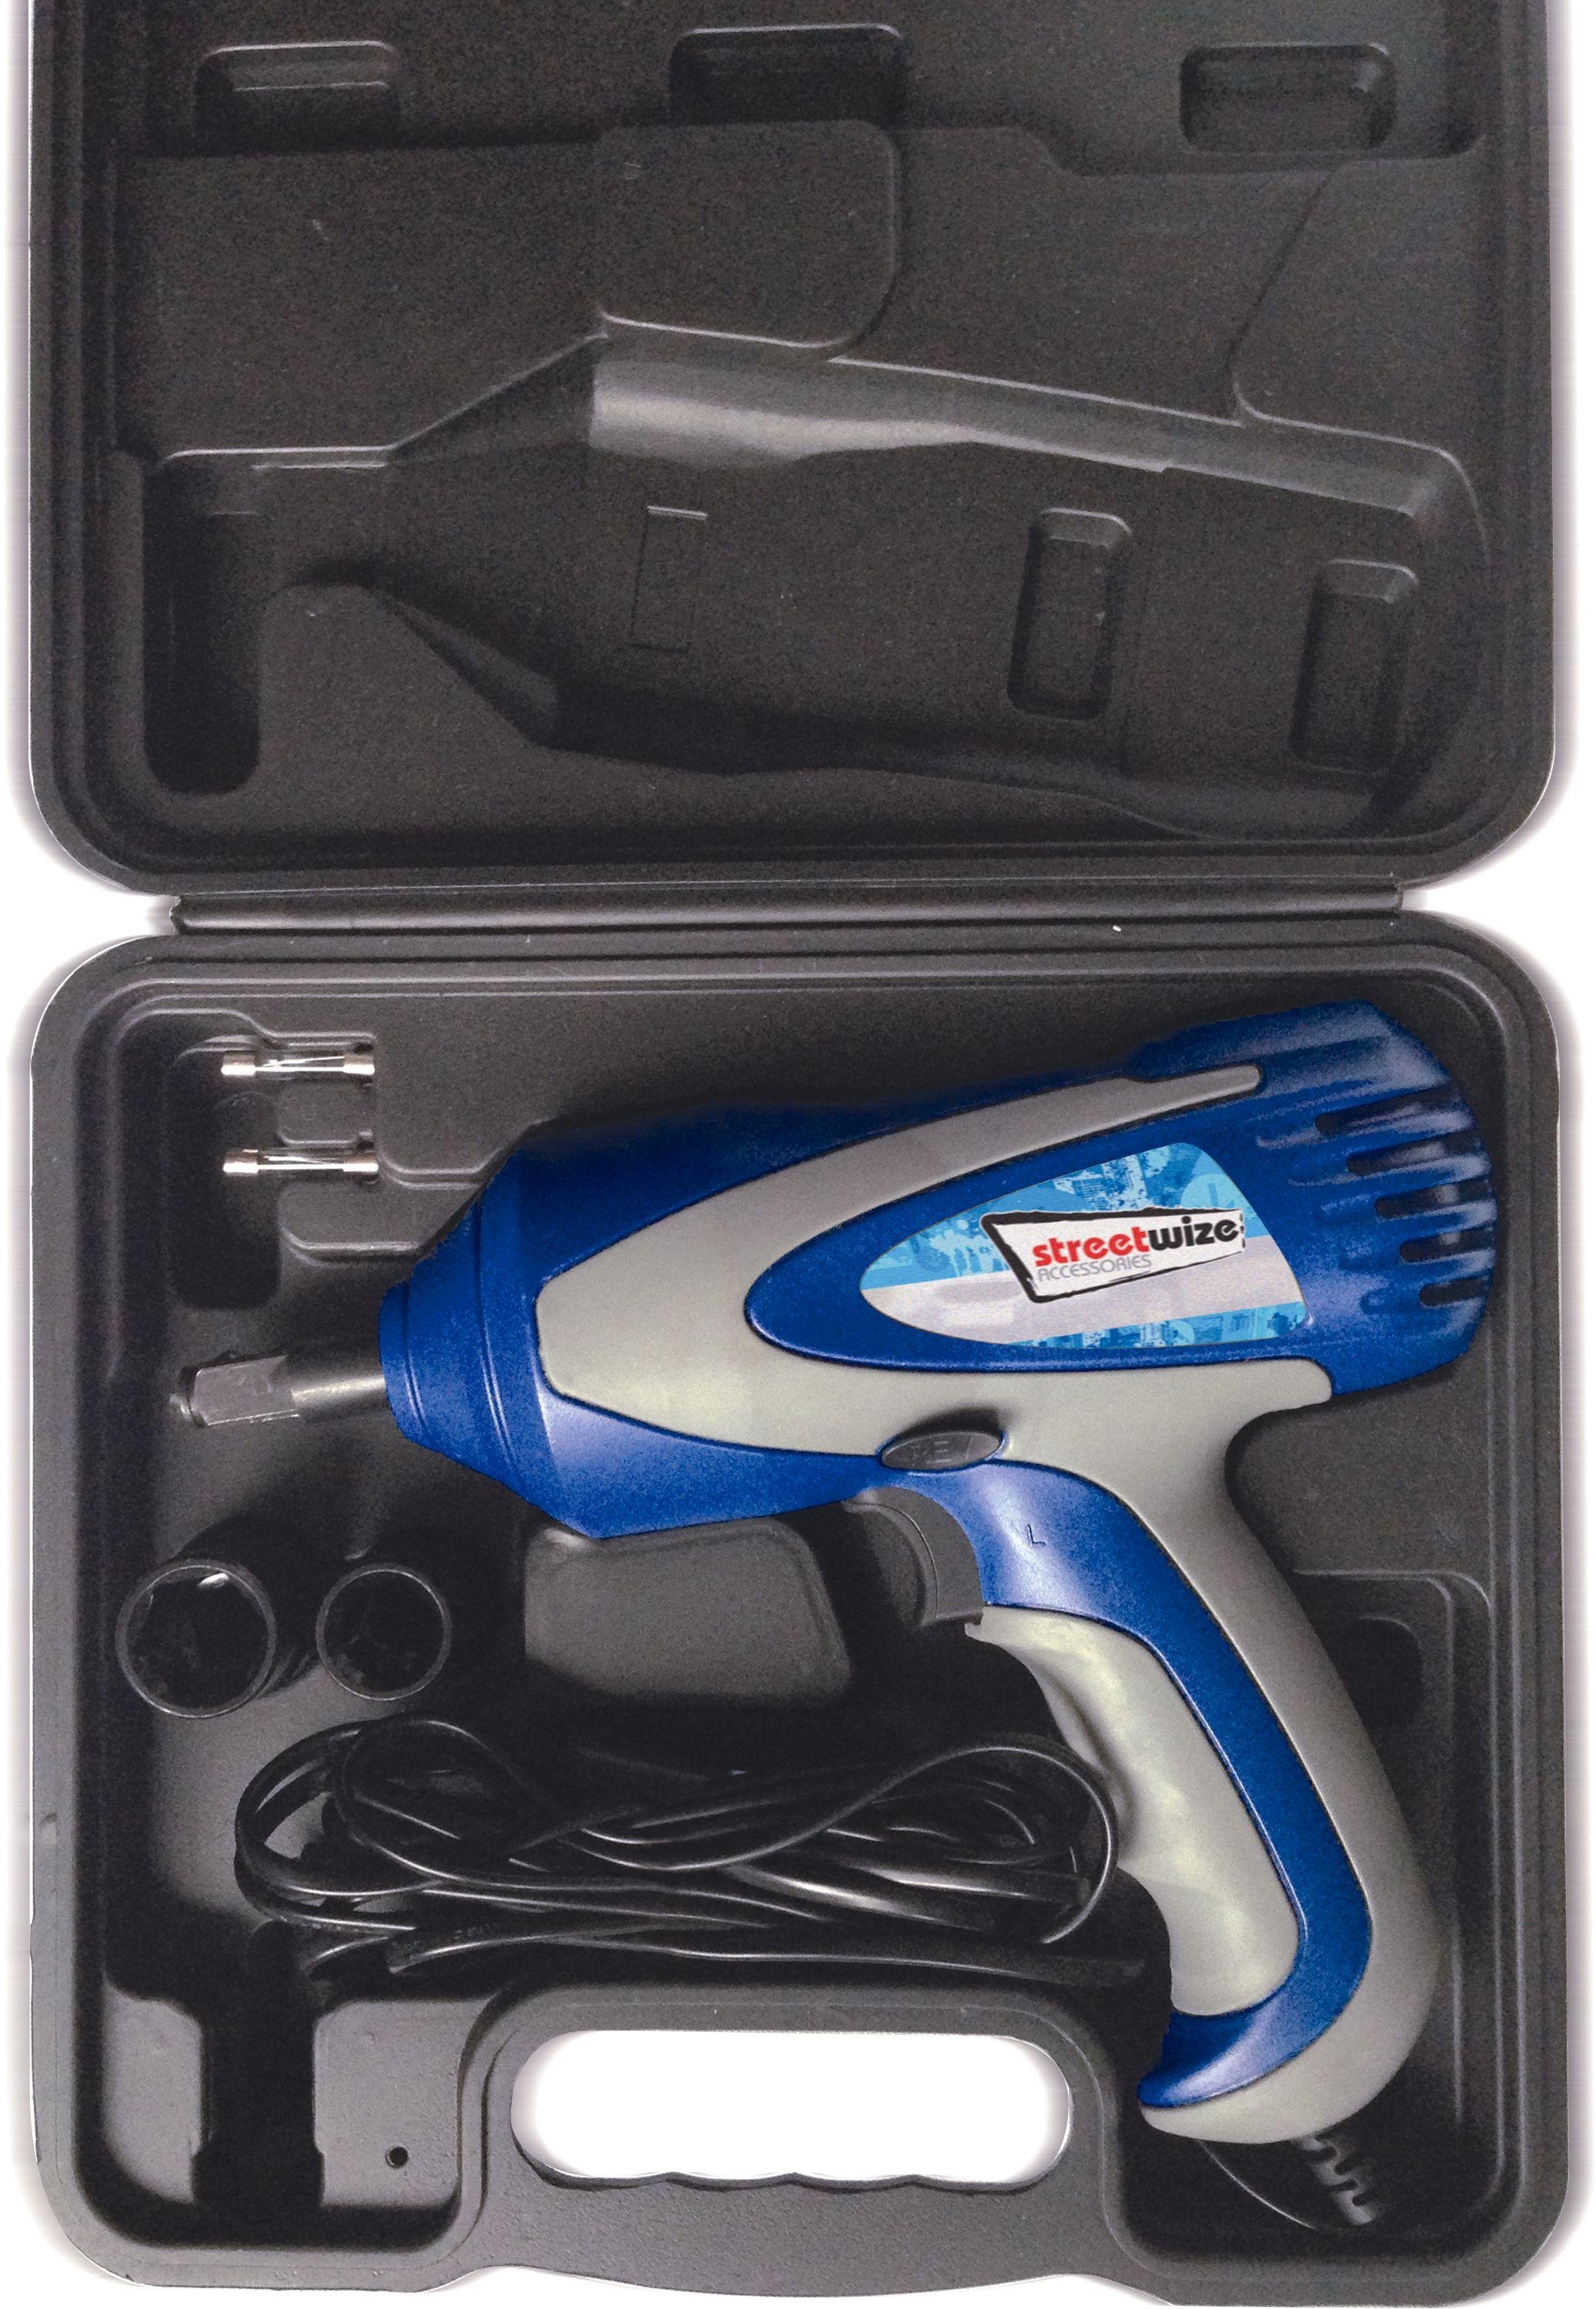 Streetwize 12v High Speed Impact Wrench